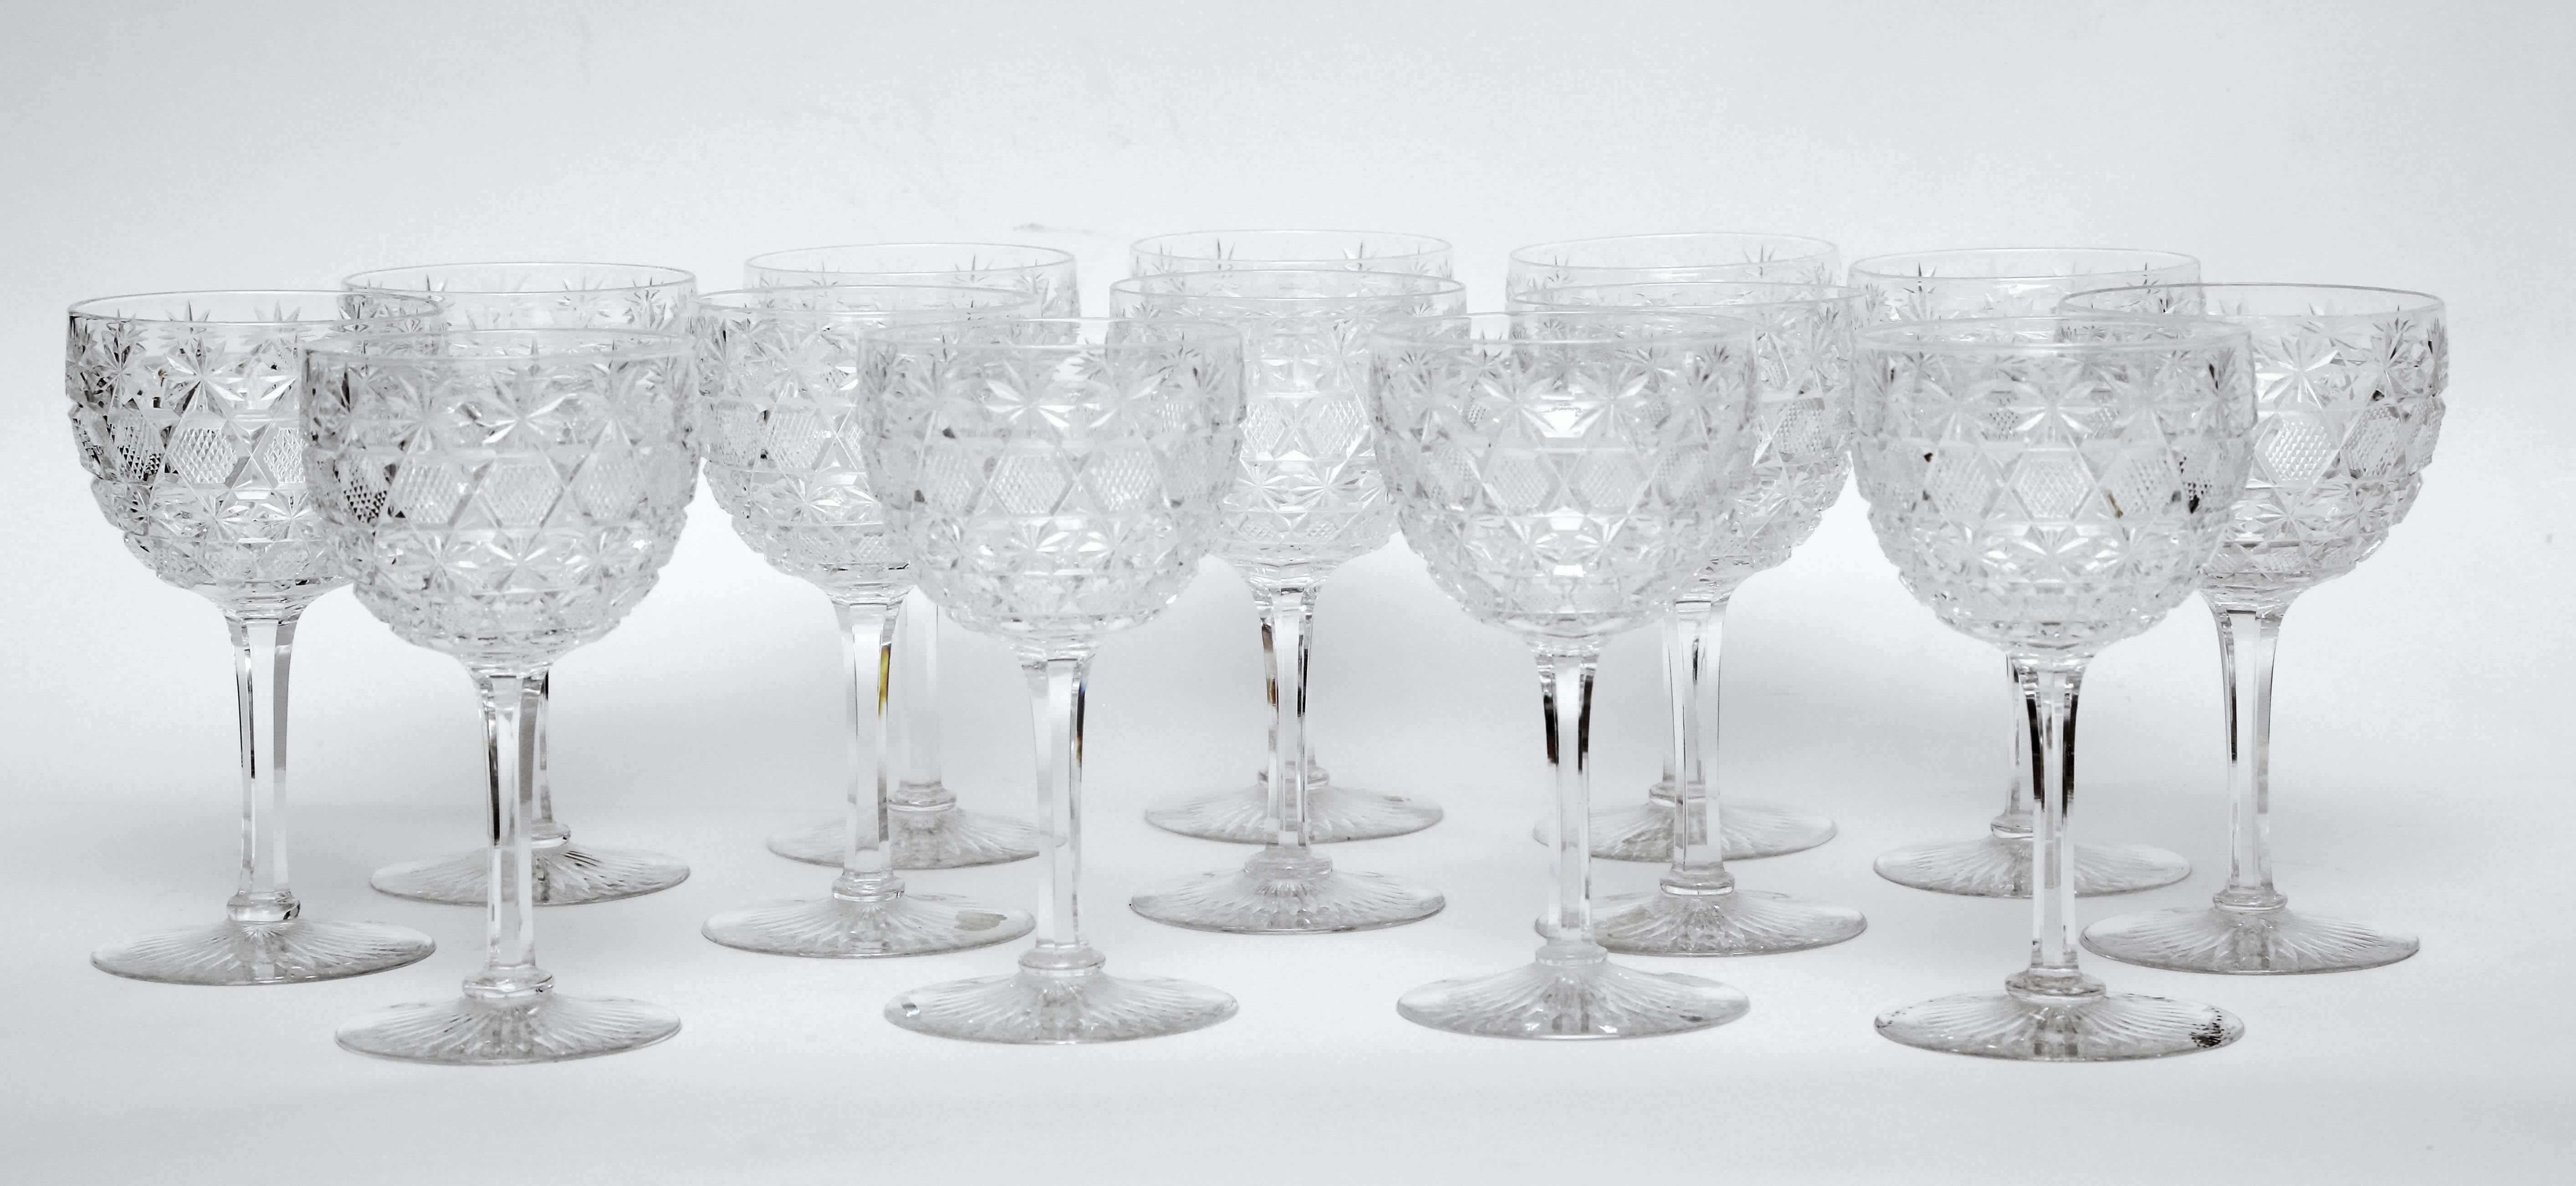 An exceptionally cut wine glass with clear crisp clarity. Nicely weighted with a fully cut stem and base. This pattern has always delighted and is ready to be mixed in with all your fine crystal services.